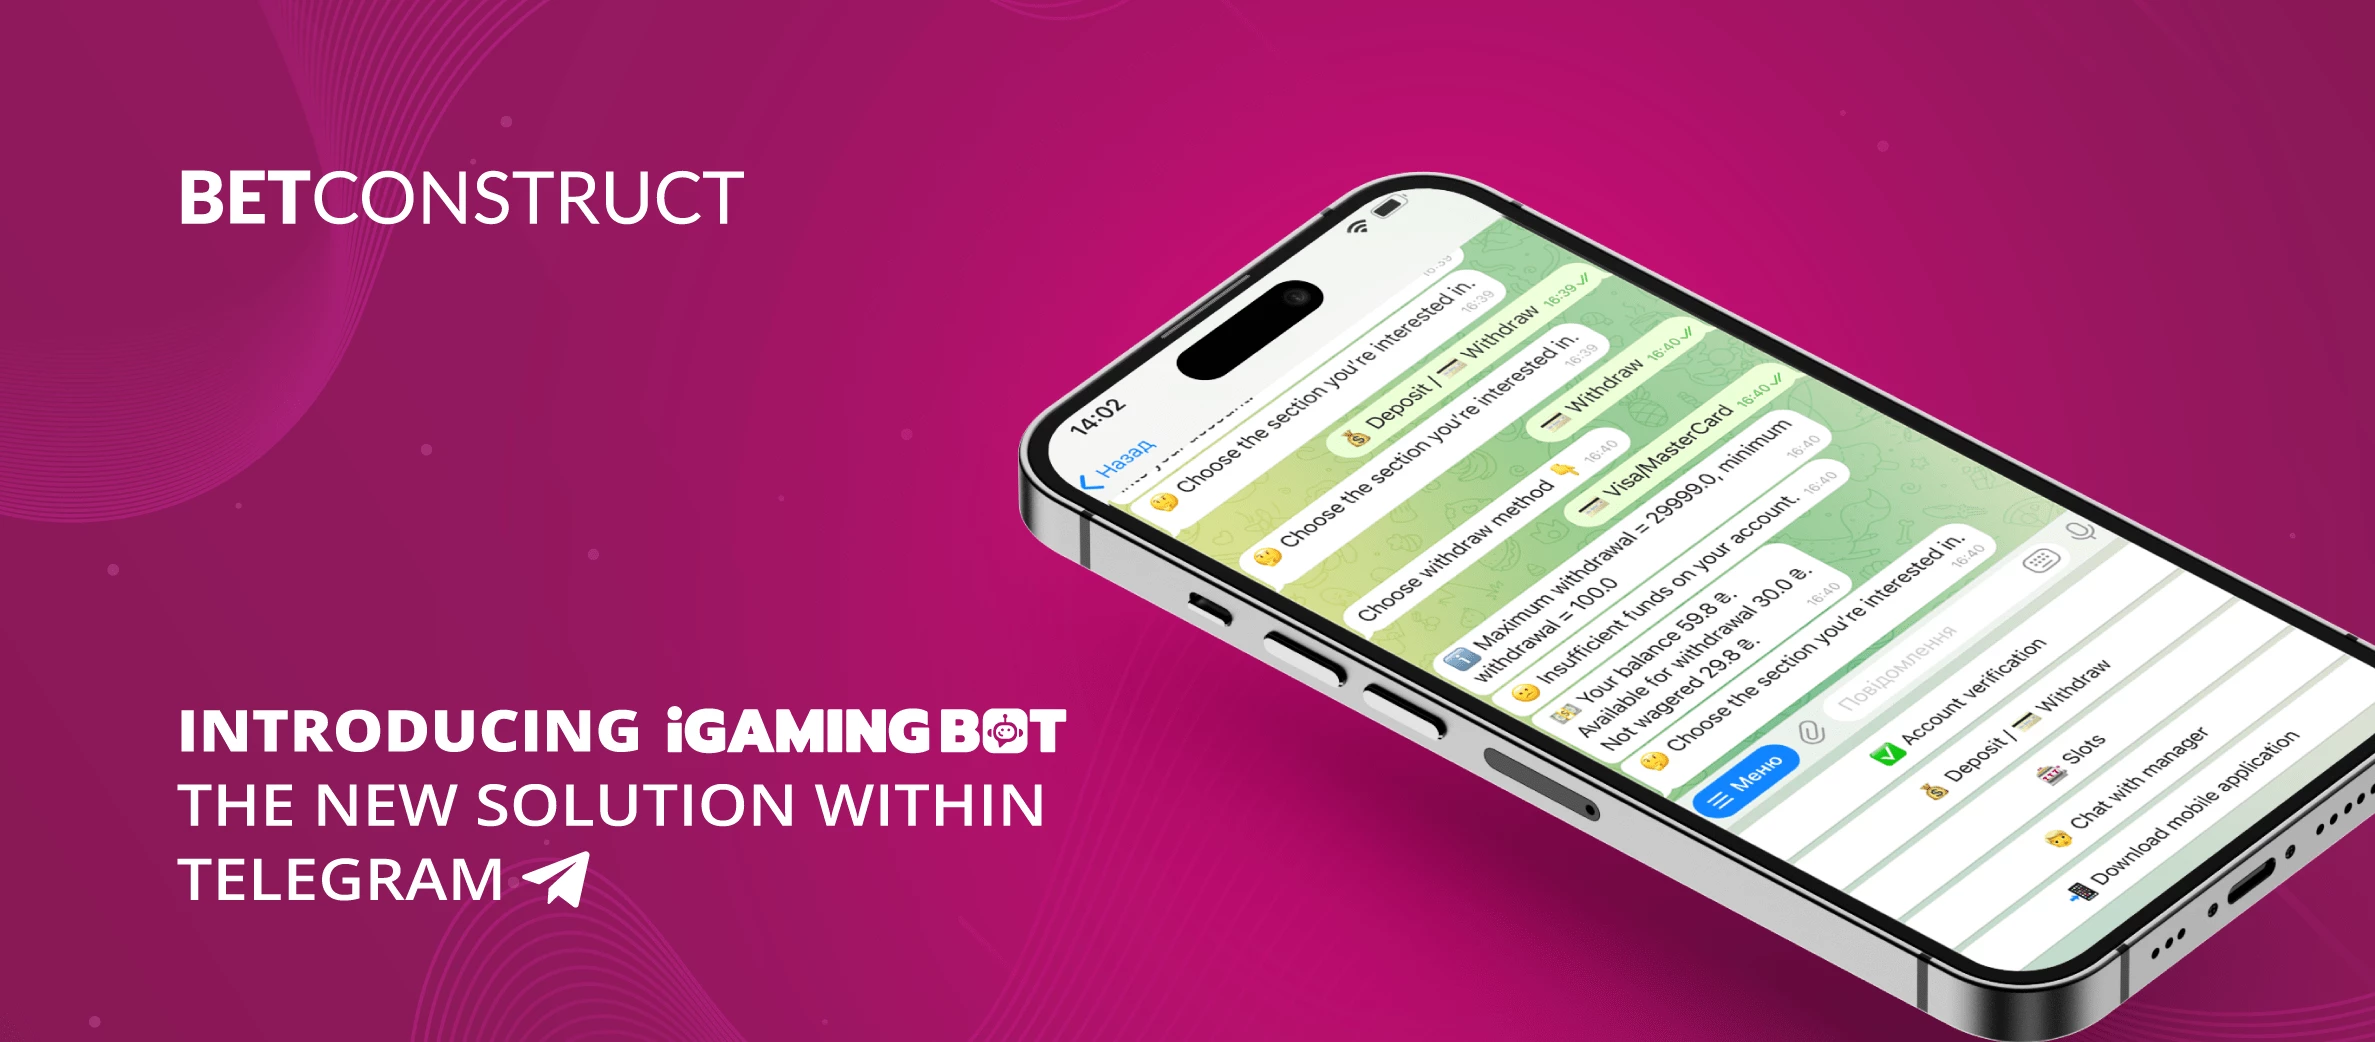 BetConstruct Unveils iGaming Bot: A New Application within Telegram